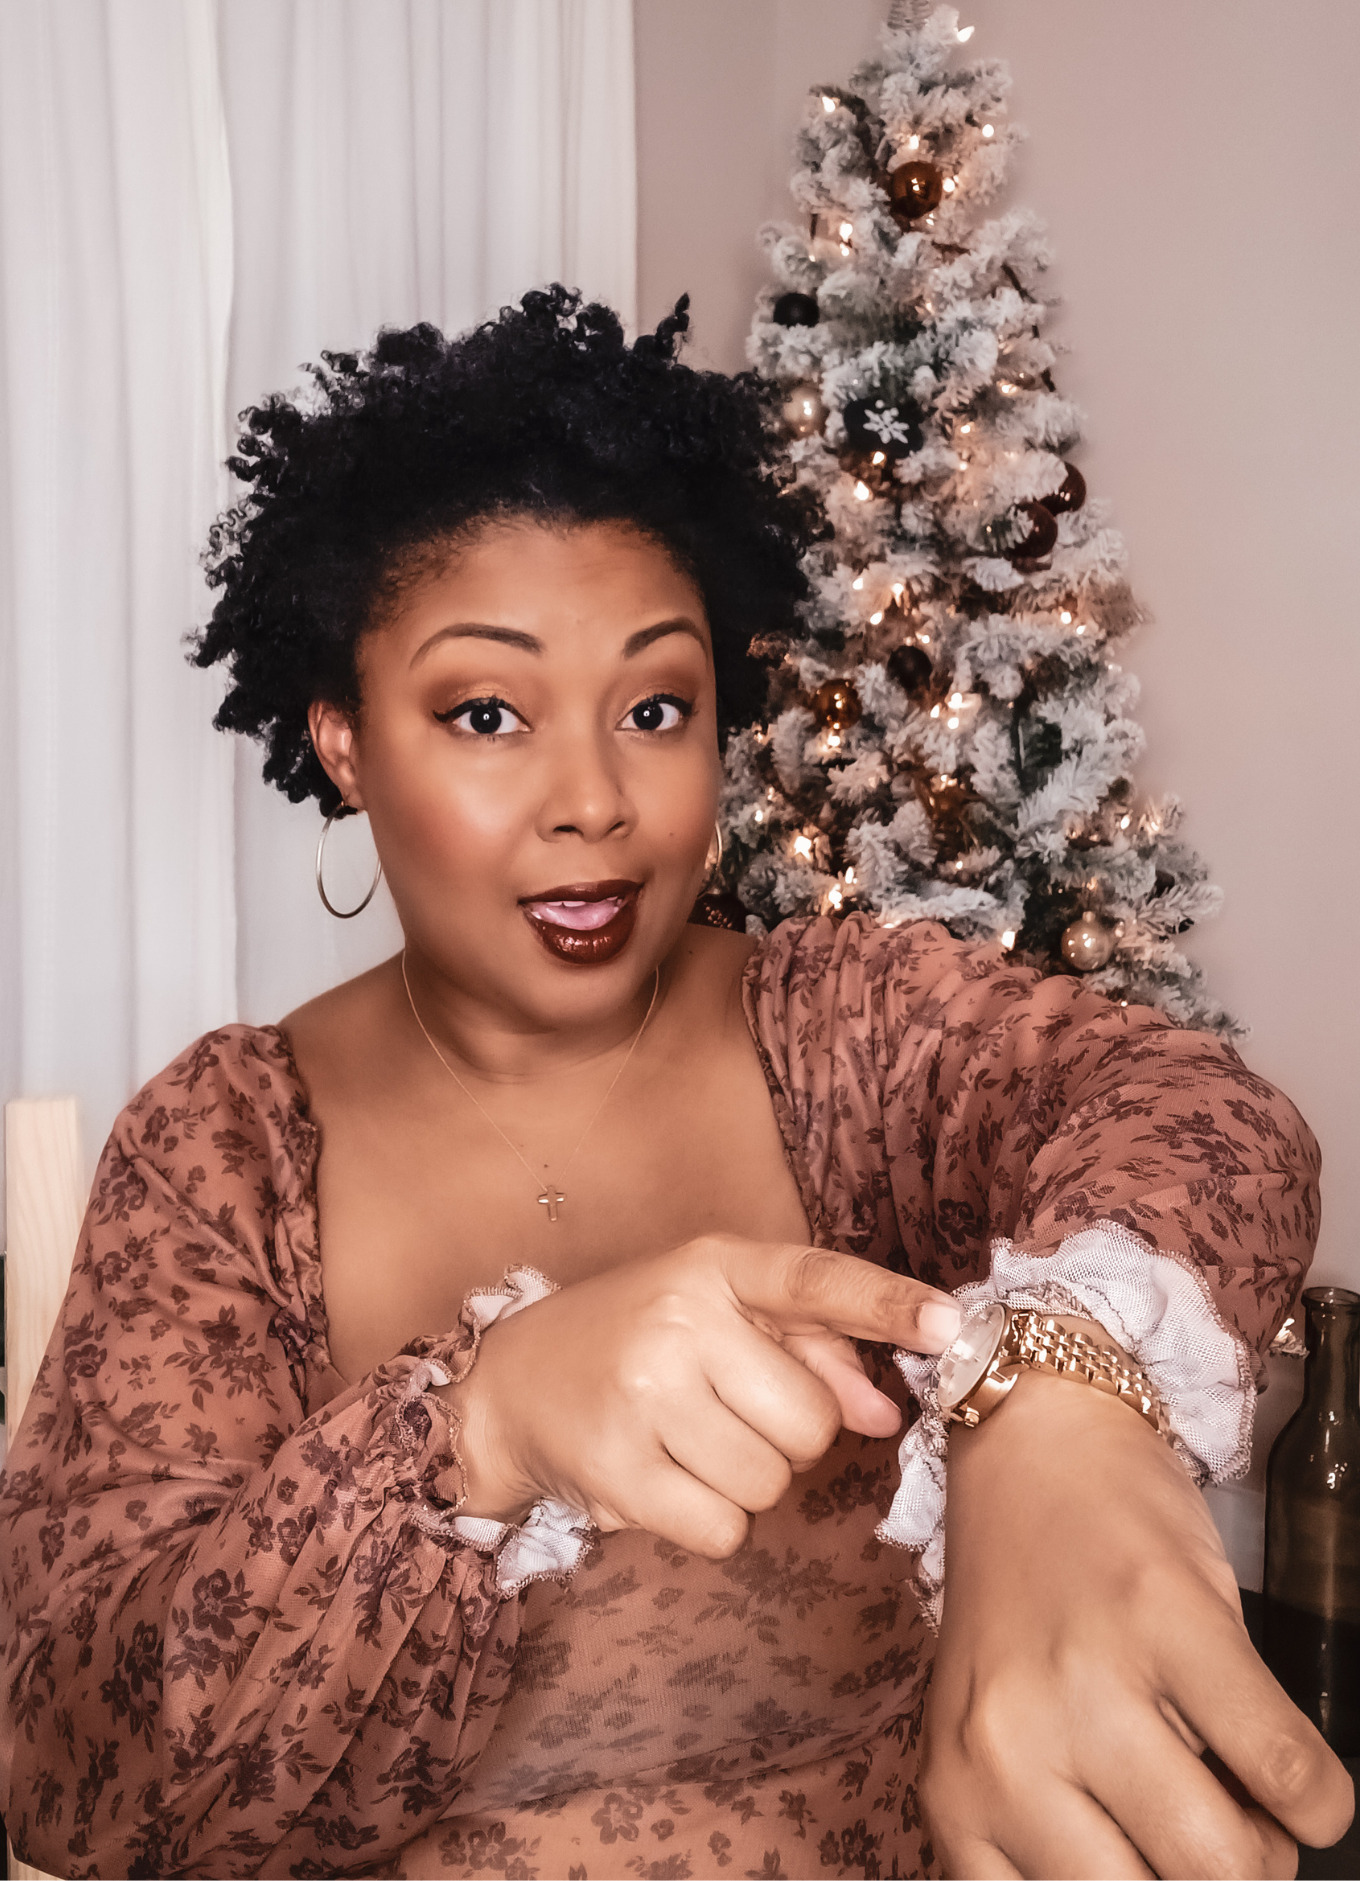 How to reset your life? Well, This Bahamian Gyal blogger, Rogan reminds that you can't waste time as the clock is always ticking. Rogan points to her watch in this photo.